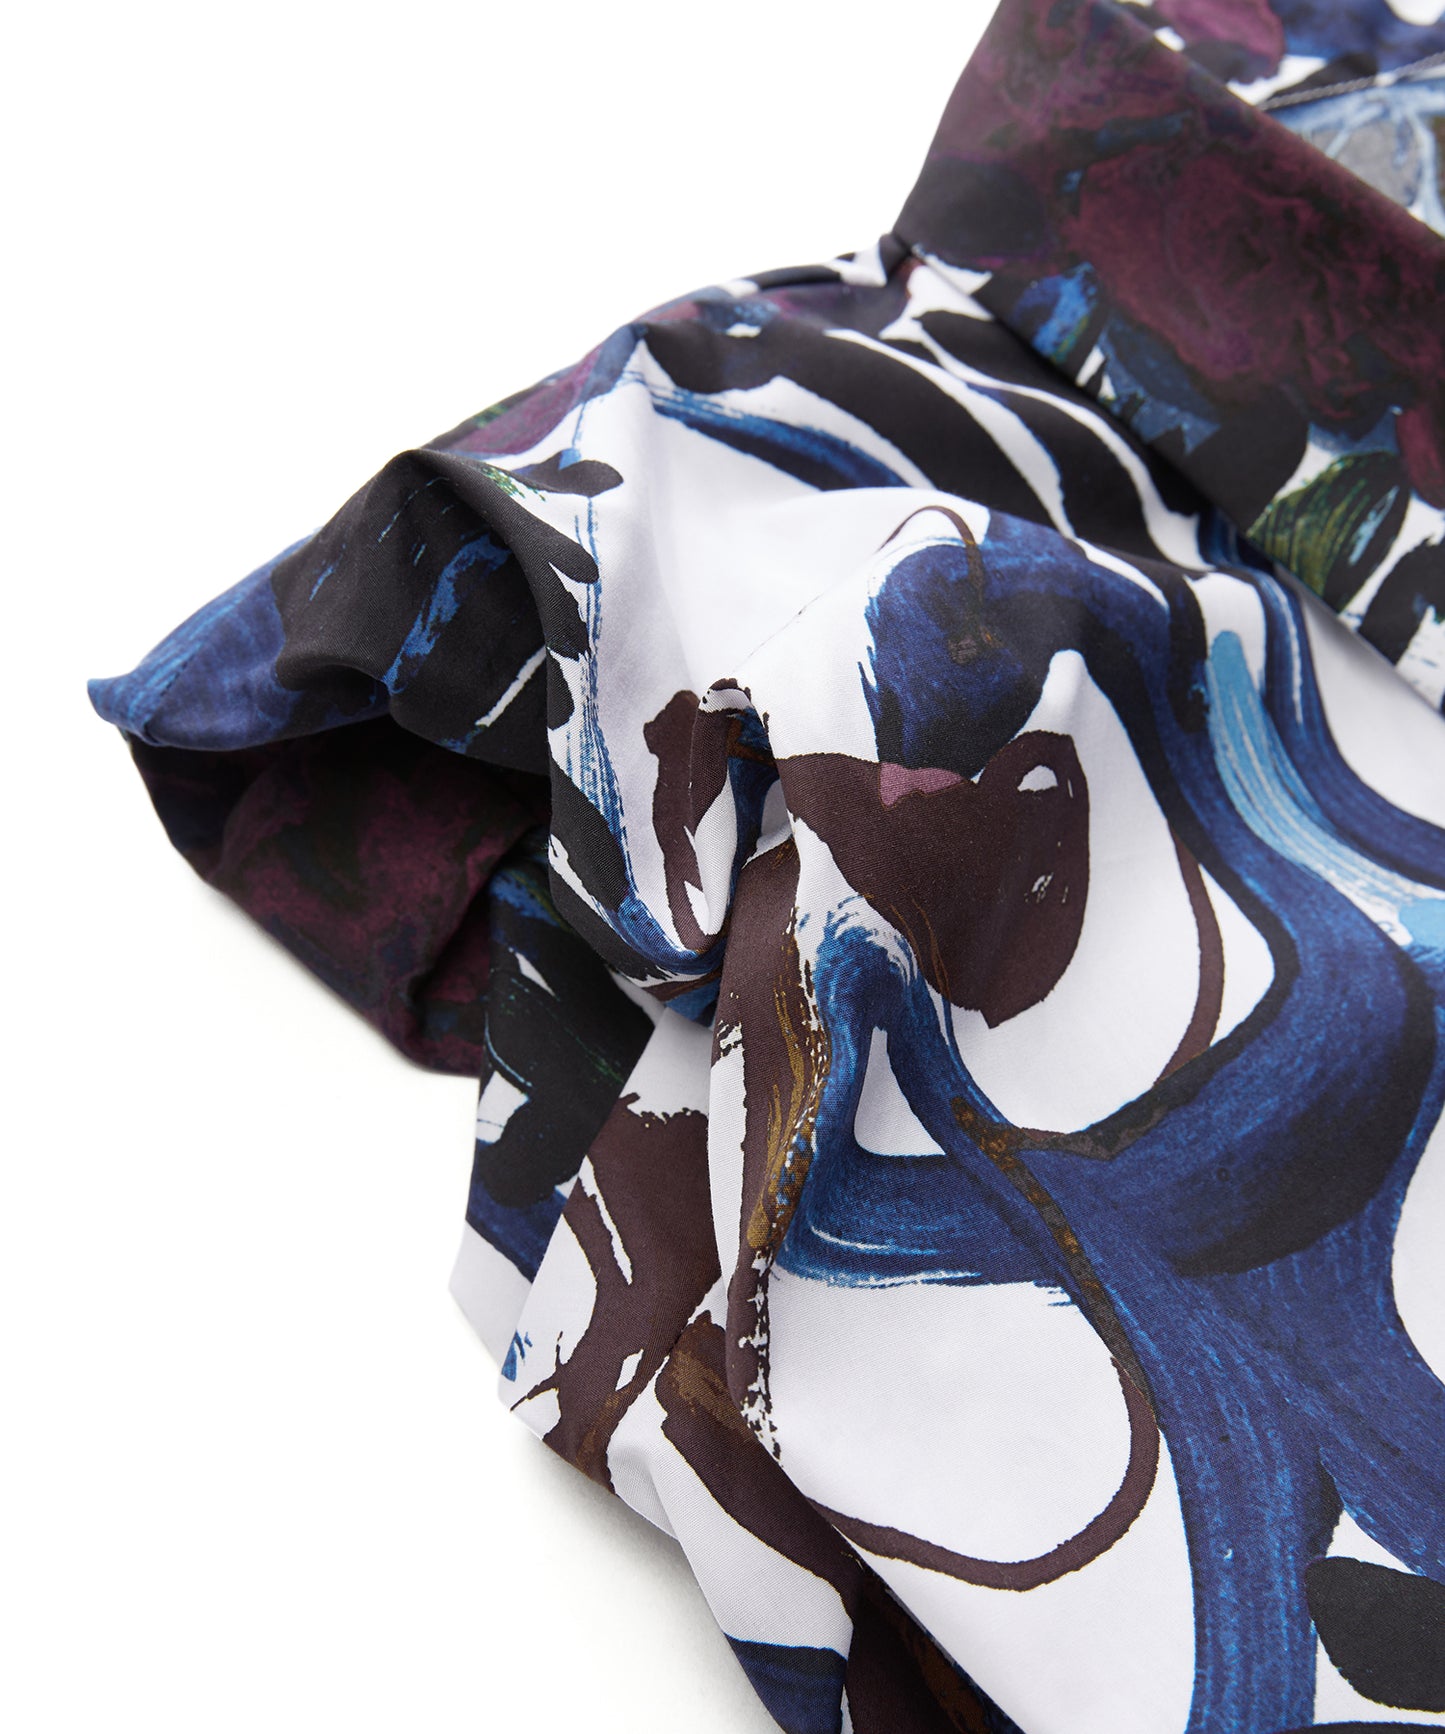 Abstract Hand-painted Floral Sleeveless Shirt